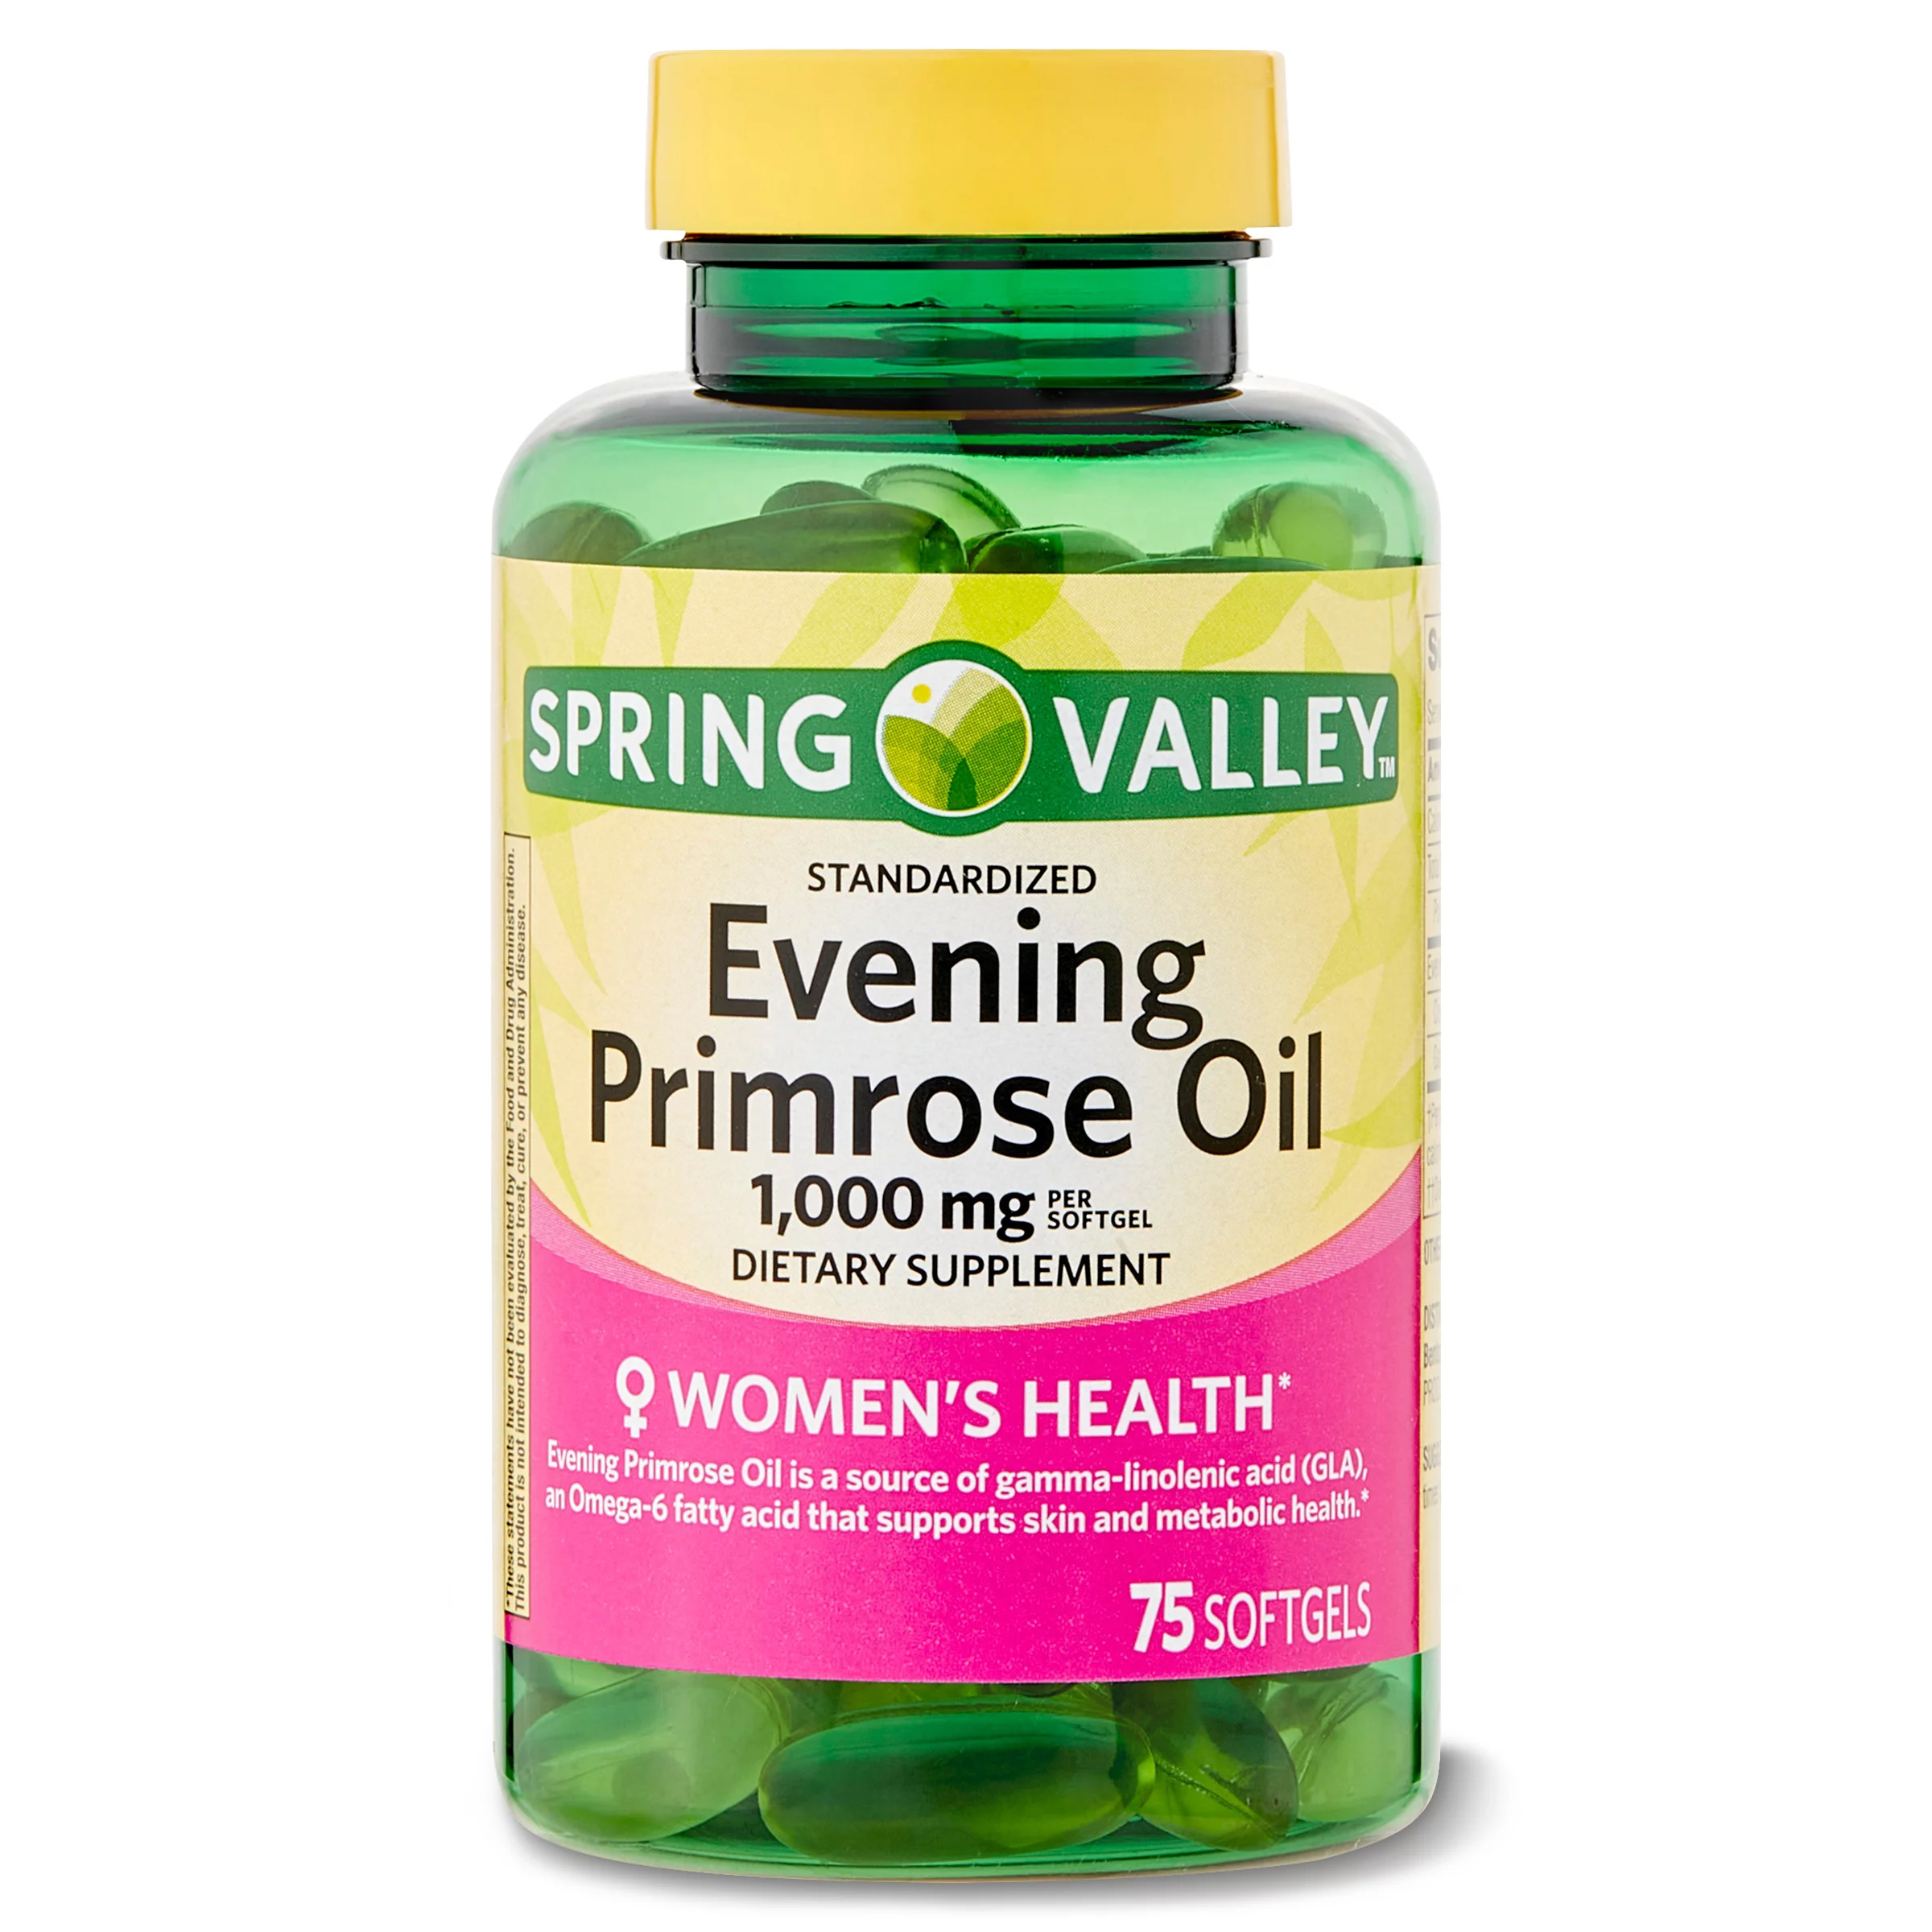 Spring Valley Evening Primrose Oil Women's Health Dietary Supplement Softgels, 1000 mg, 75 Count